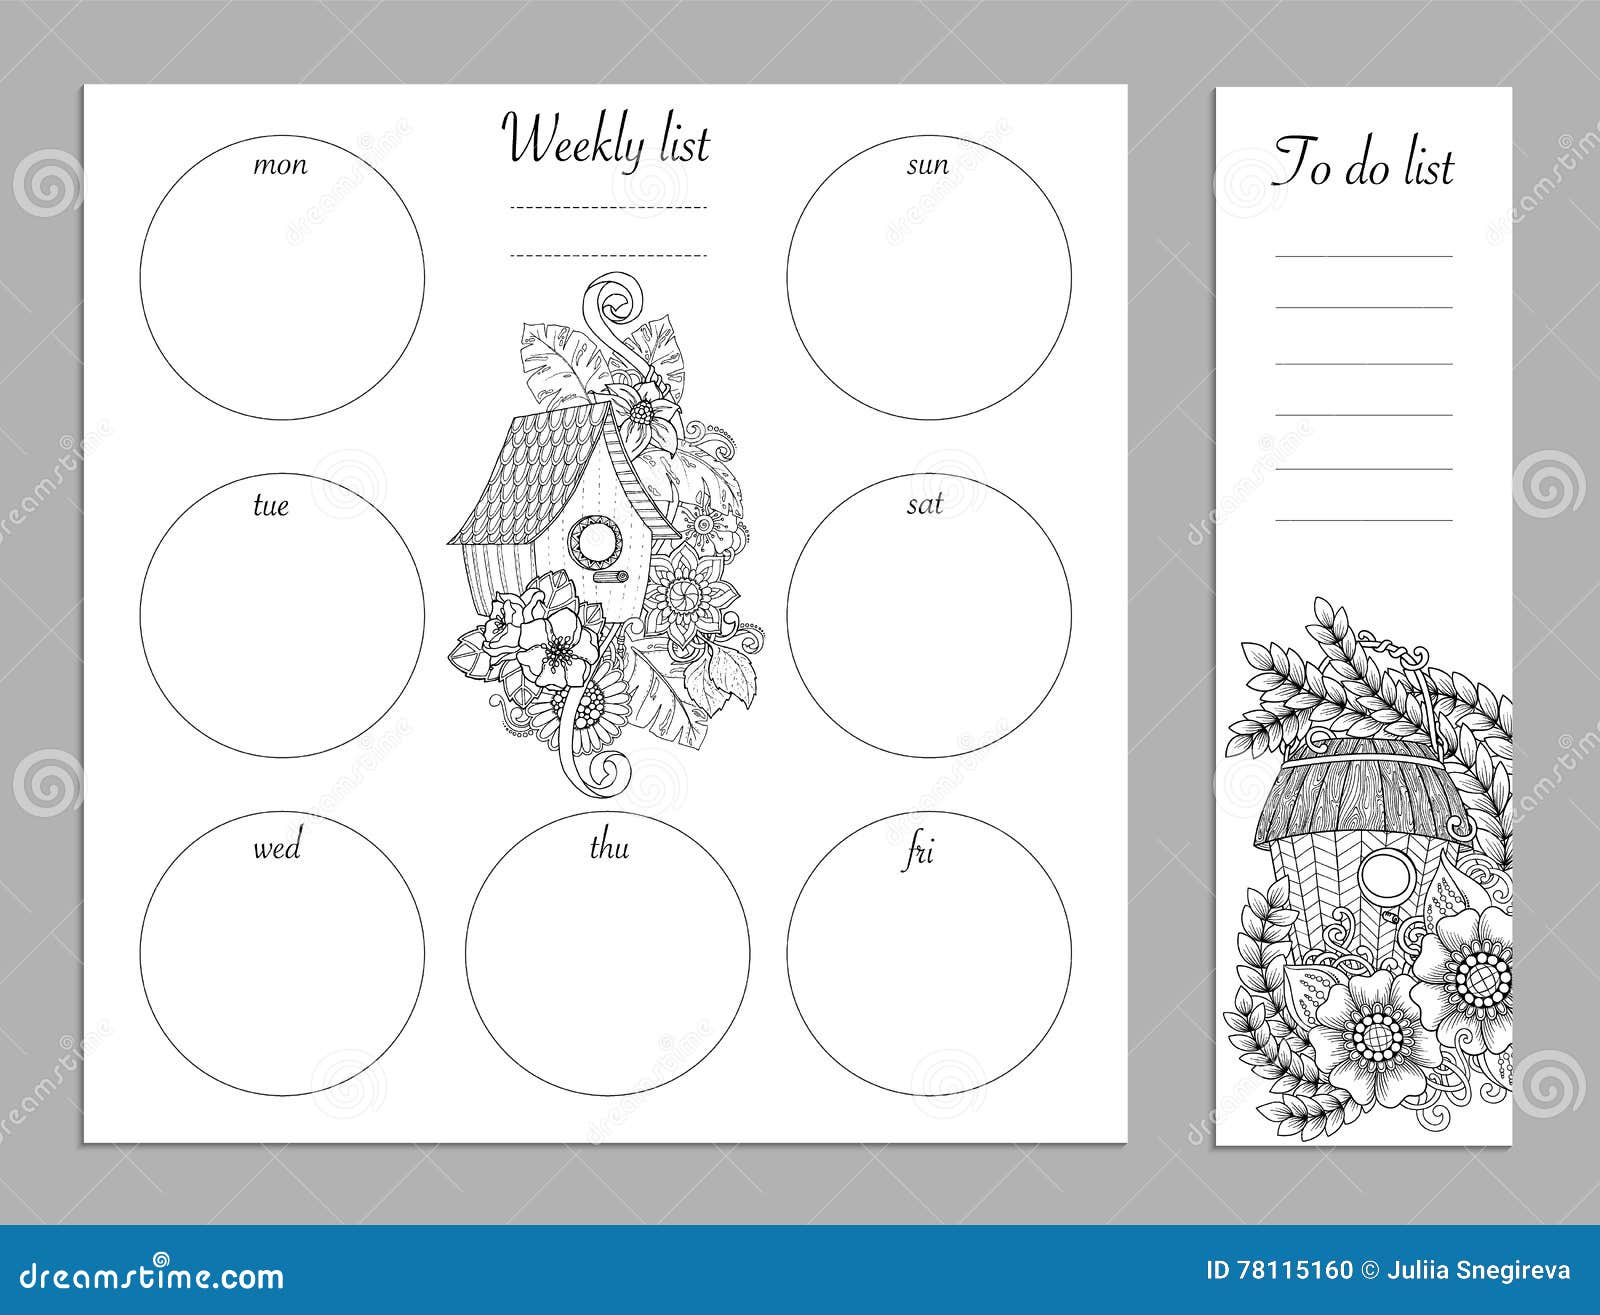 Download Weekly List Design For Notepad. Sketchbook, Diary Mockup ...